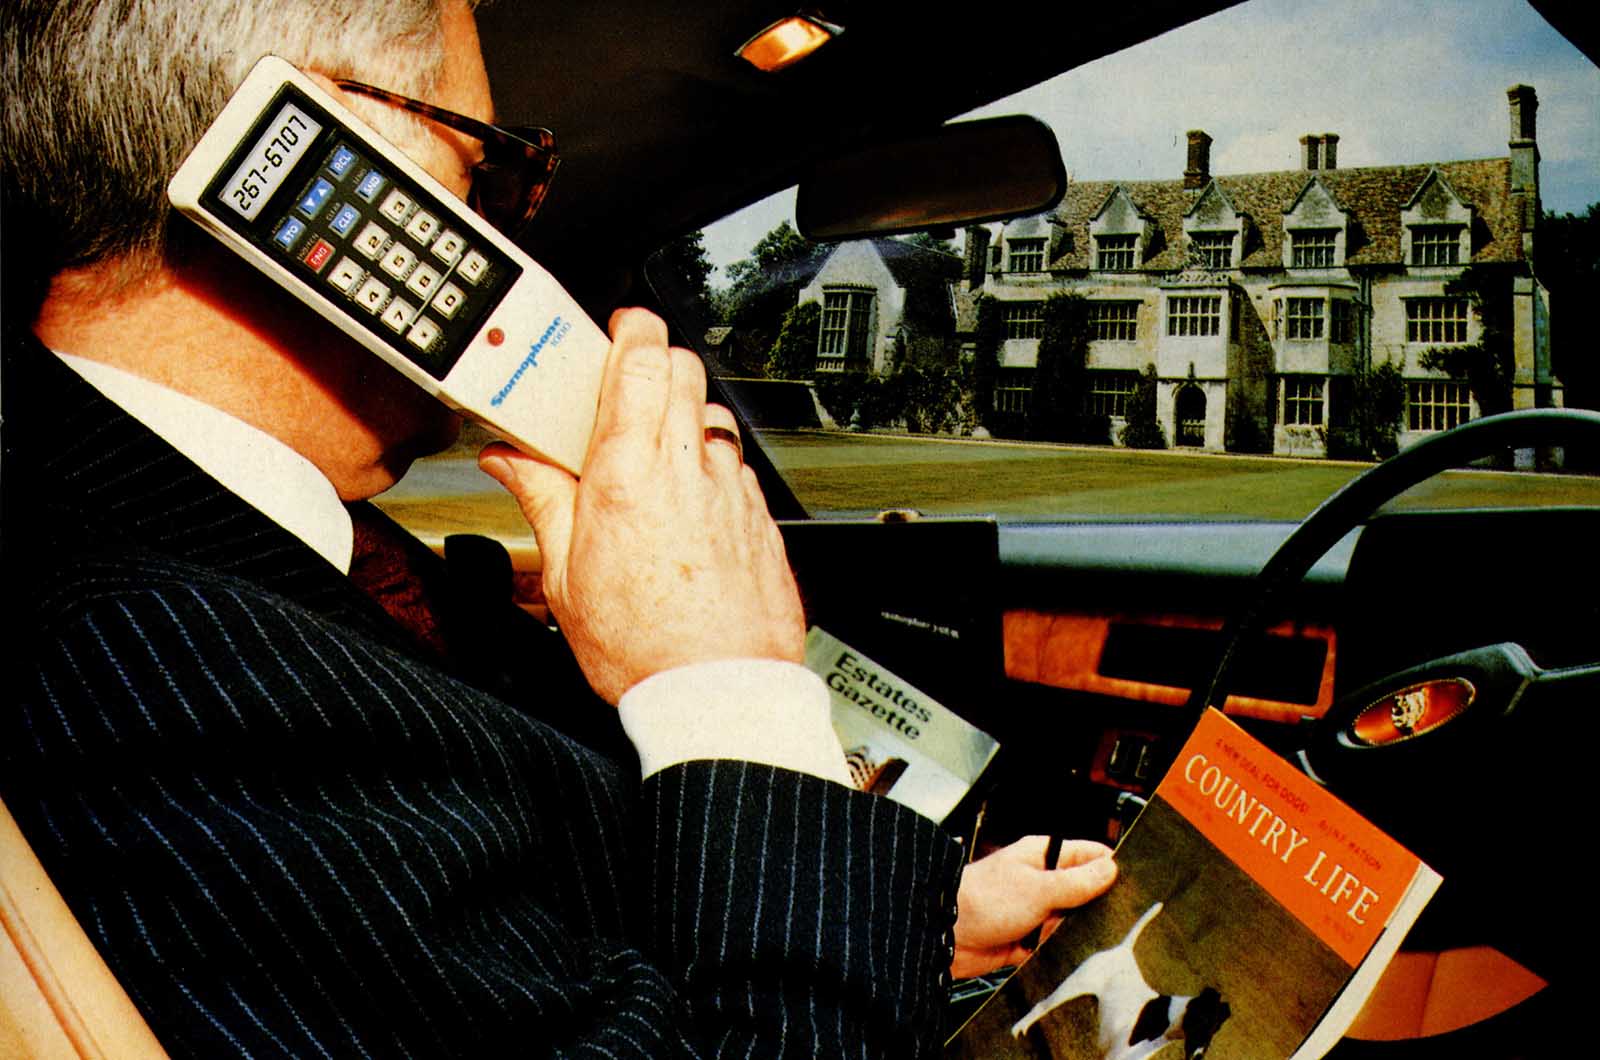 Talking dashboards, car phones and graphic equalisers: The ’80s car tech we still miss